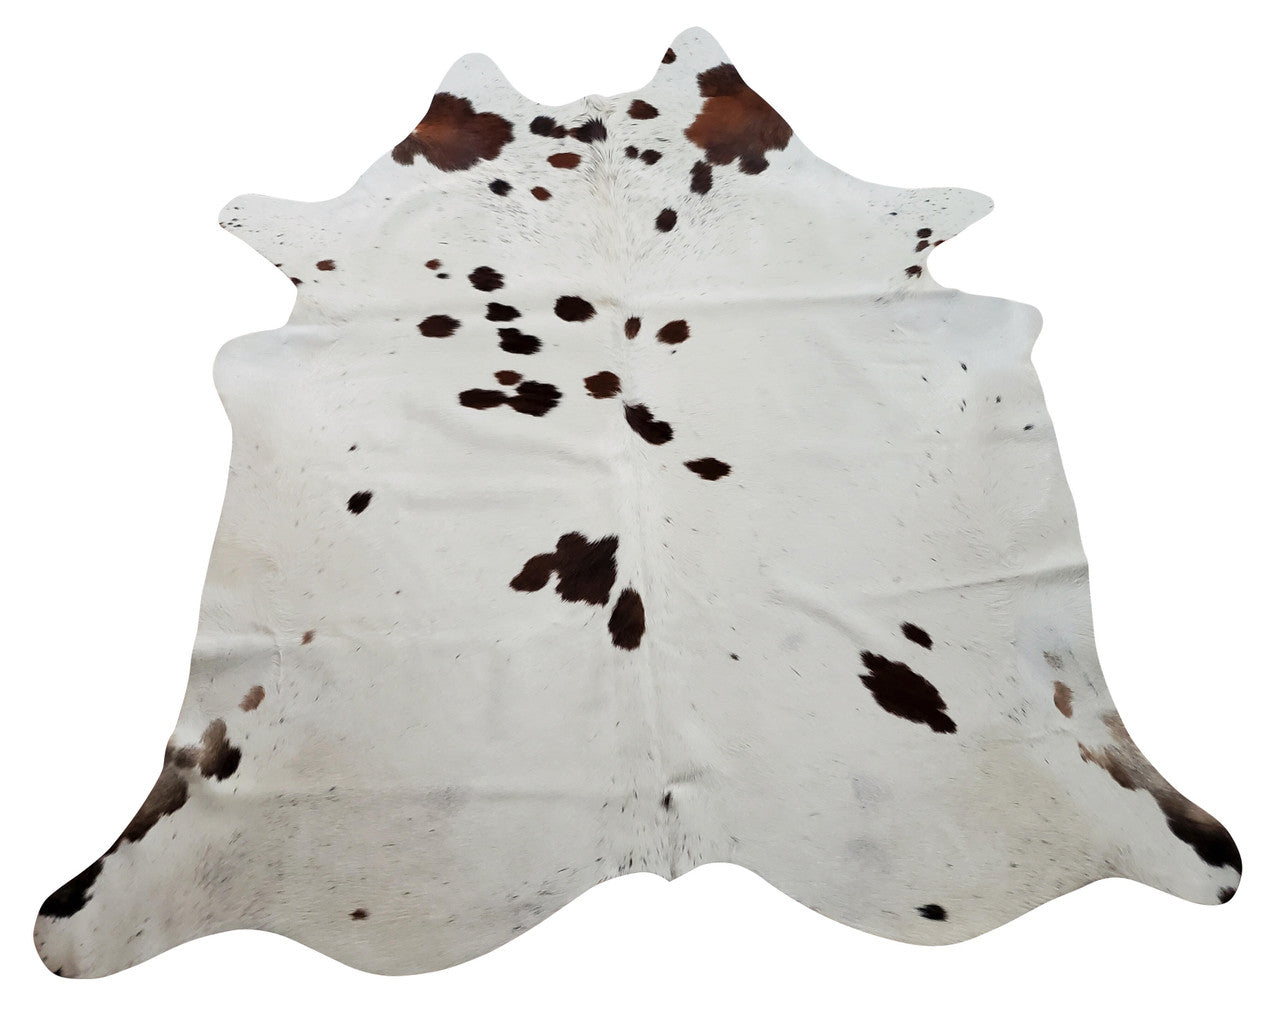 You can mix cowhide rug with sheepskins, brown white cowhide decor gives modern touch to your living room.
